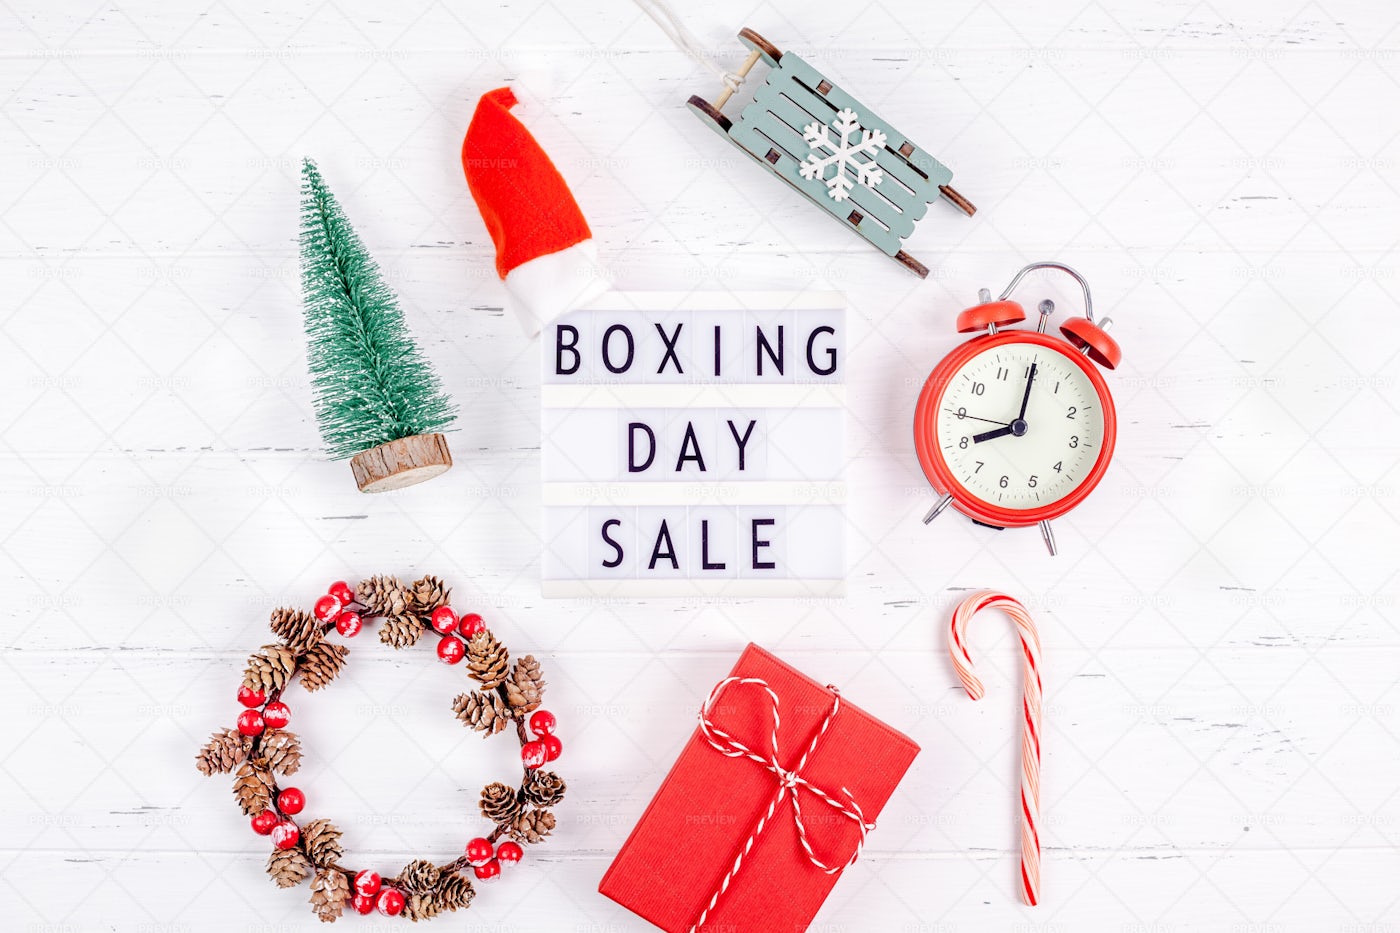 Boxing Day Sale Promotion: Stock Photos